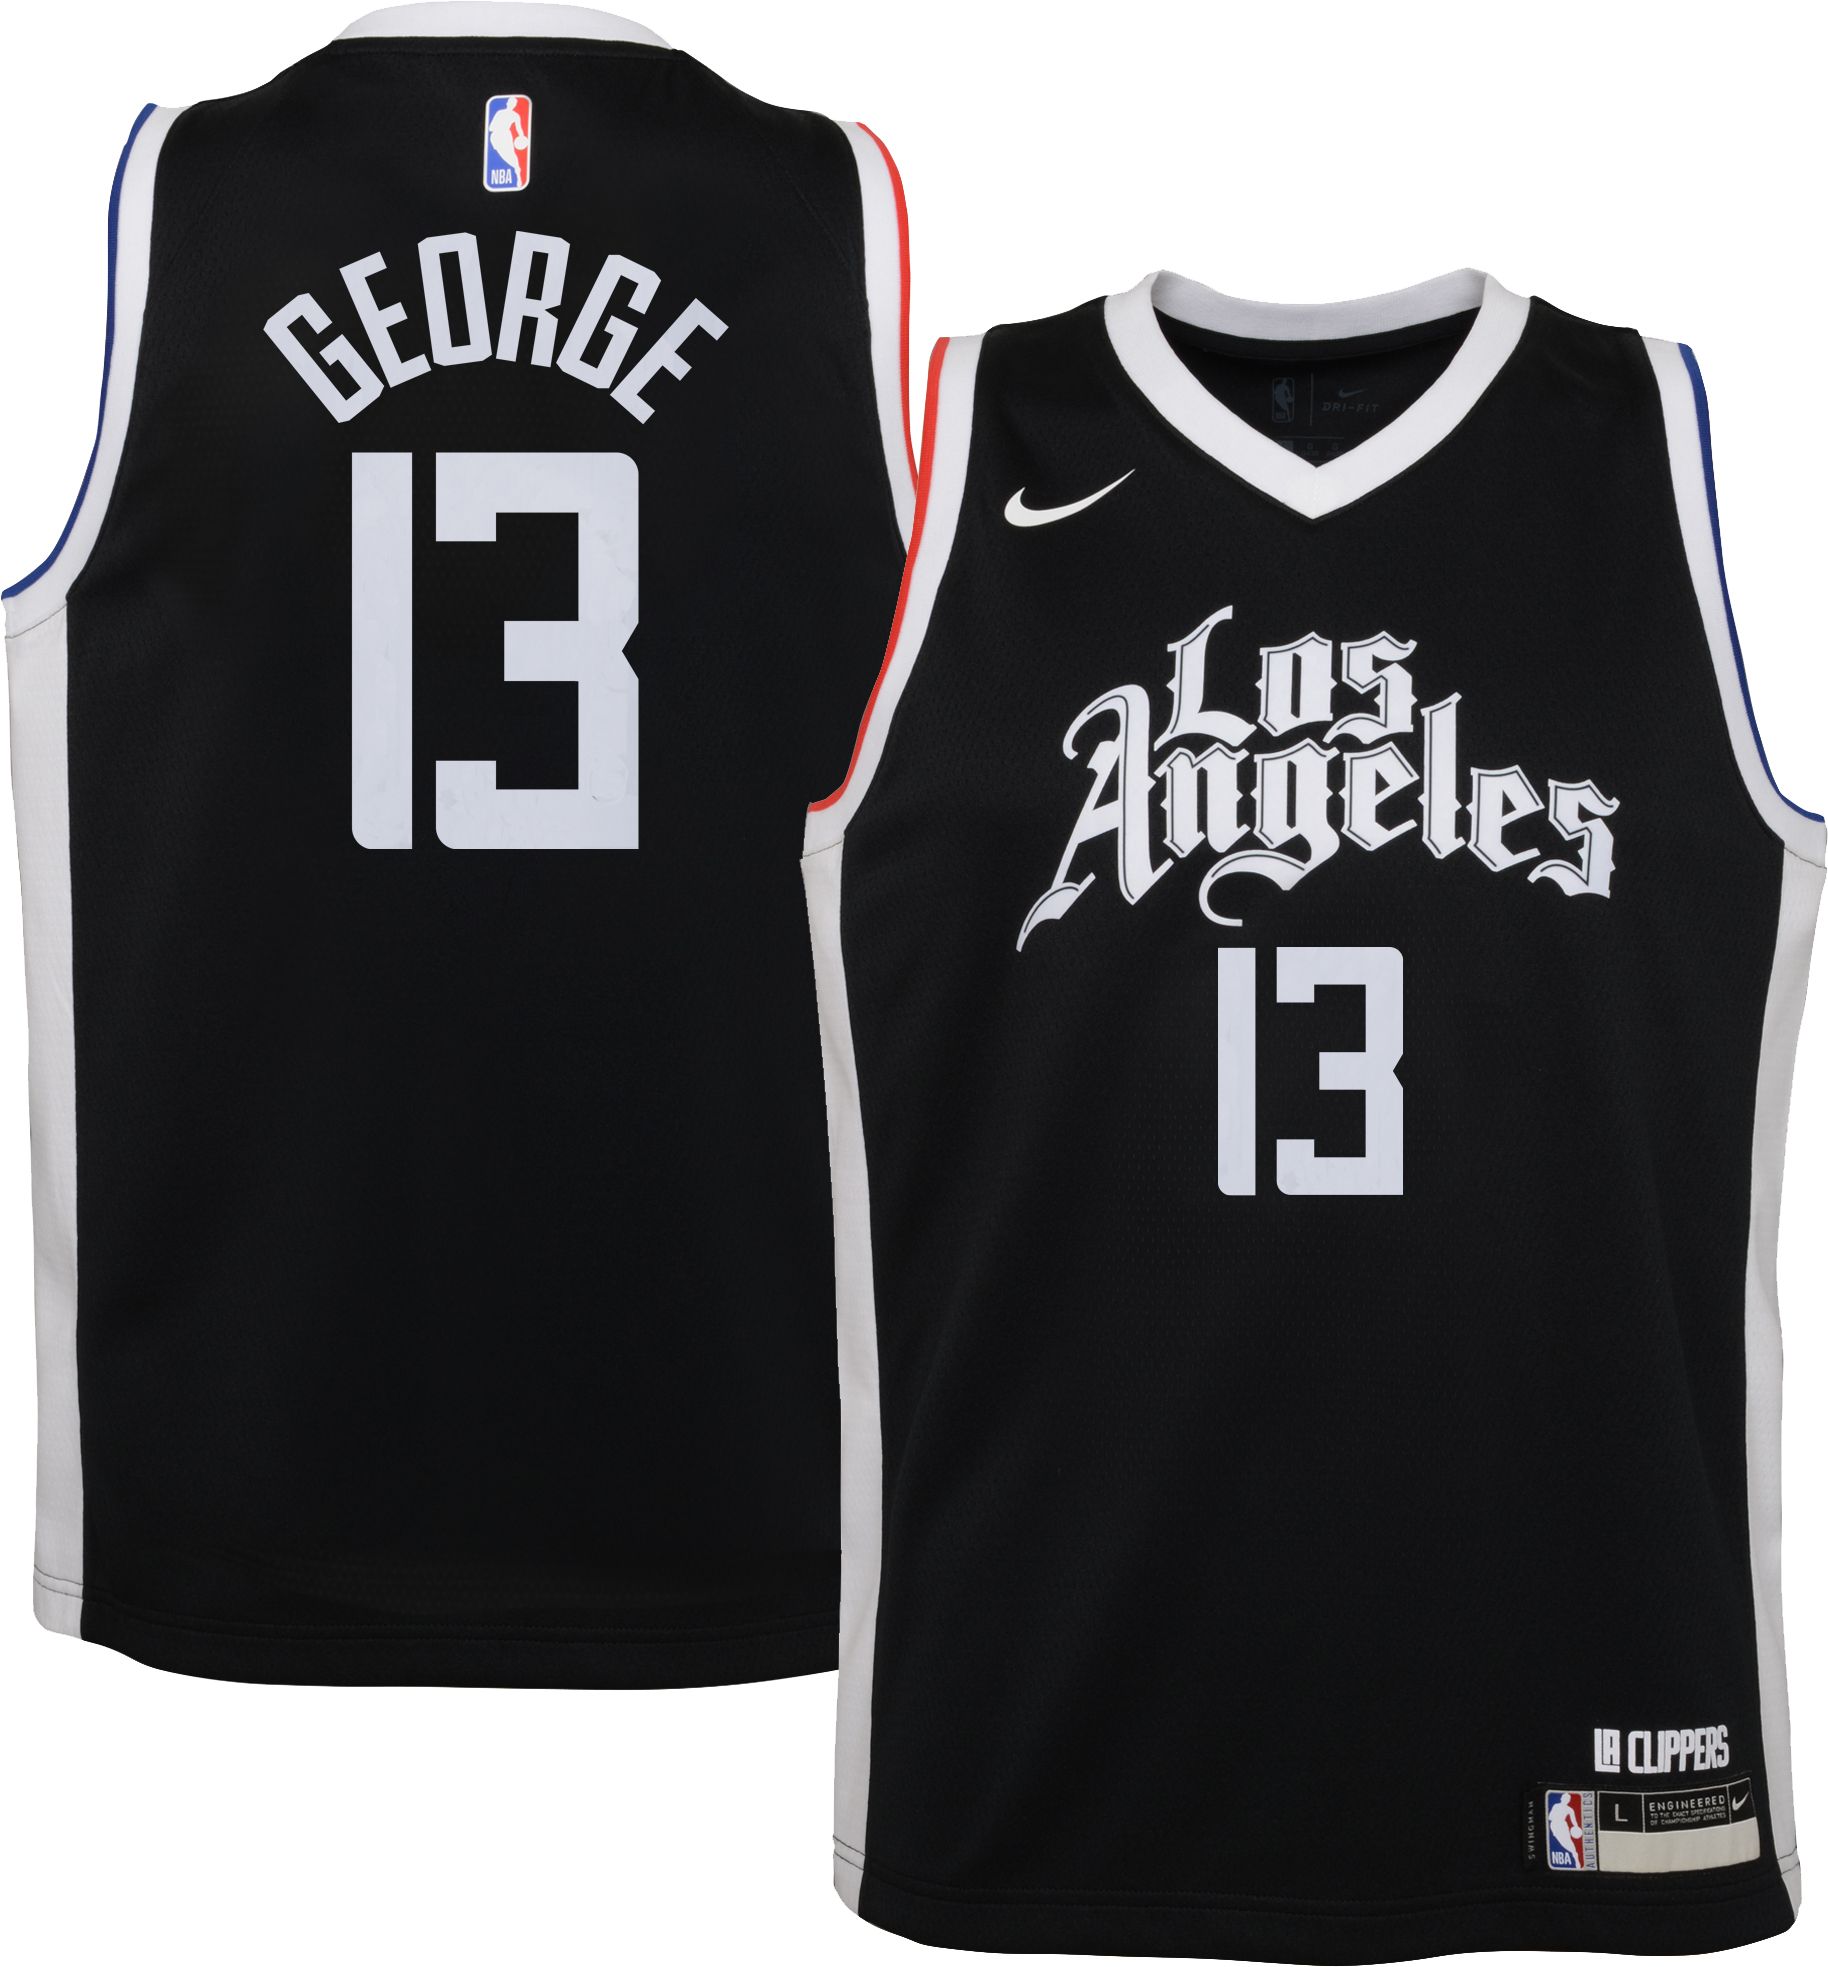 paul george clippers jersey youth